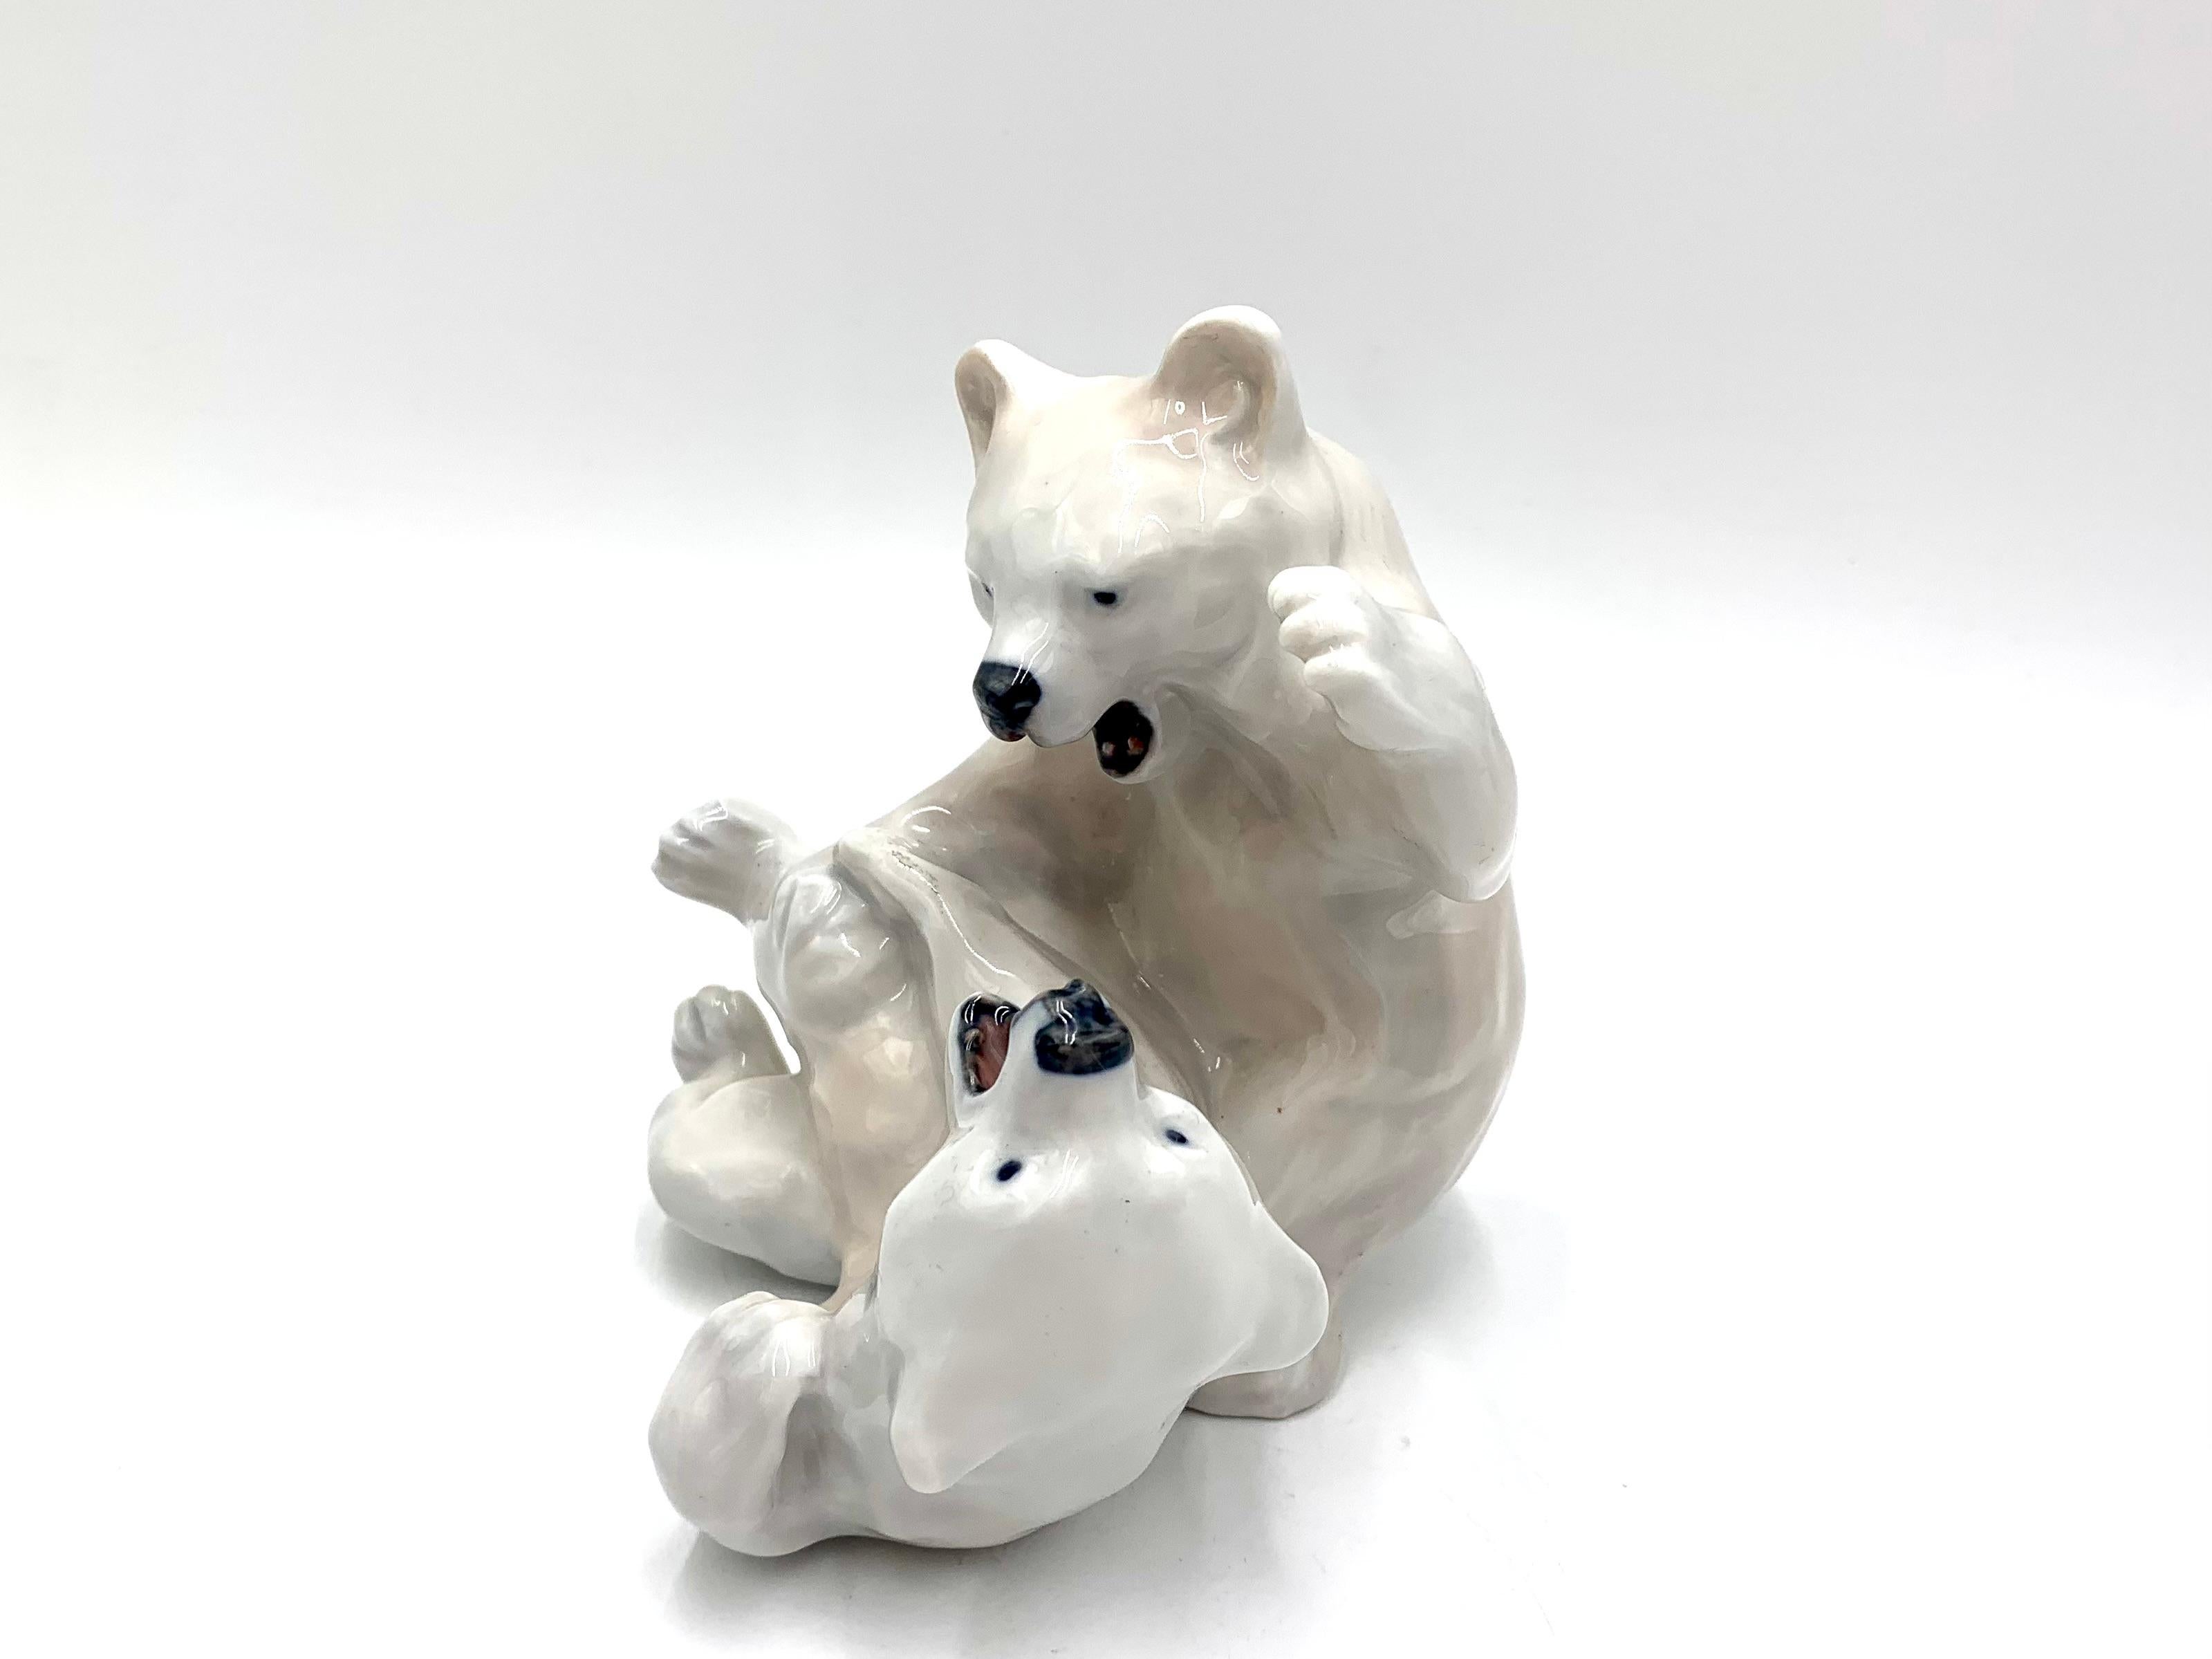 Porcelain figurine of playing polar bears
Made in Denmark by the Royal Copenhagen manufactory
Produced in 1969-1973.
Model number # 1107
Very good condition, no damage.
Measures: height 14cm, width 12cm, depth 14cm.